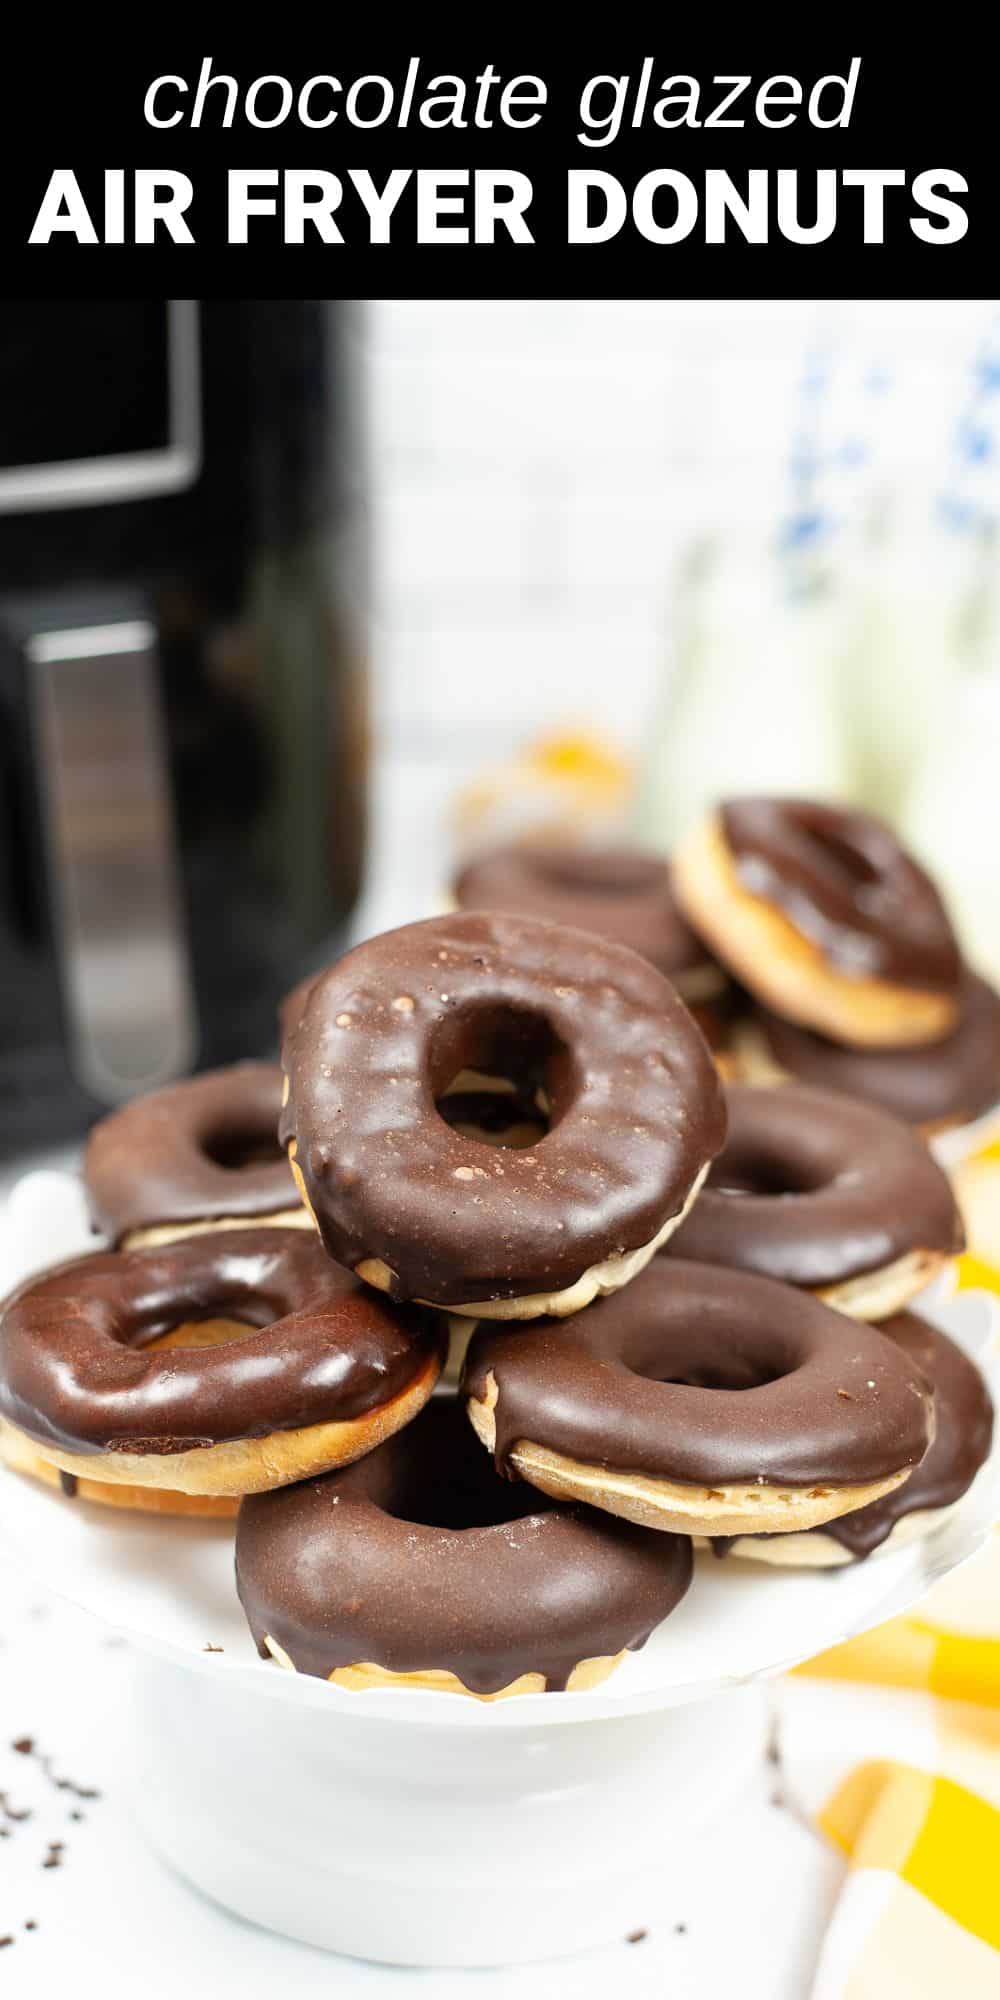 These chocolate glazed air fryer donuts give you the delicious taste of a freshly baked donut in the comfort of your own home. Soft and fluffy yeast donuts with a rich chocolate frosting, these treats are the perfect indulgent breakfast for lazy weekends.